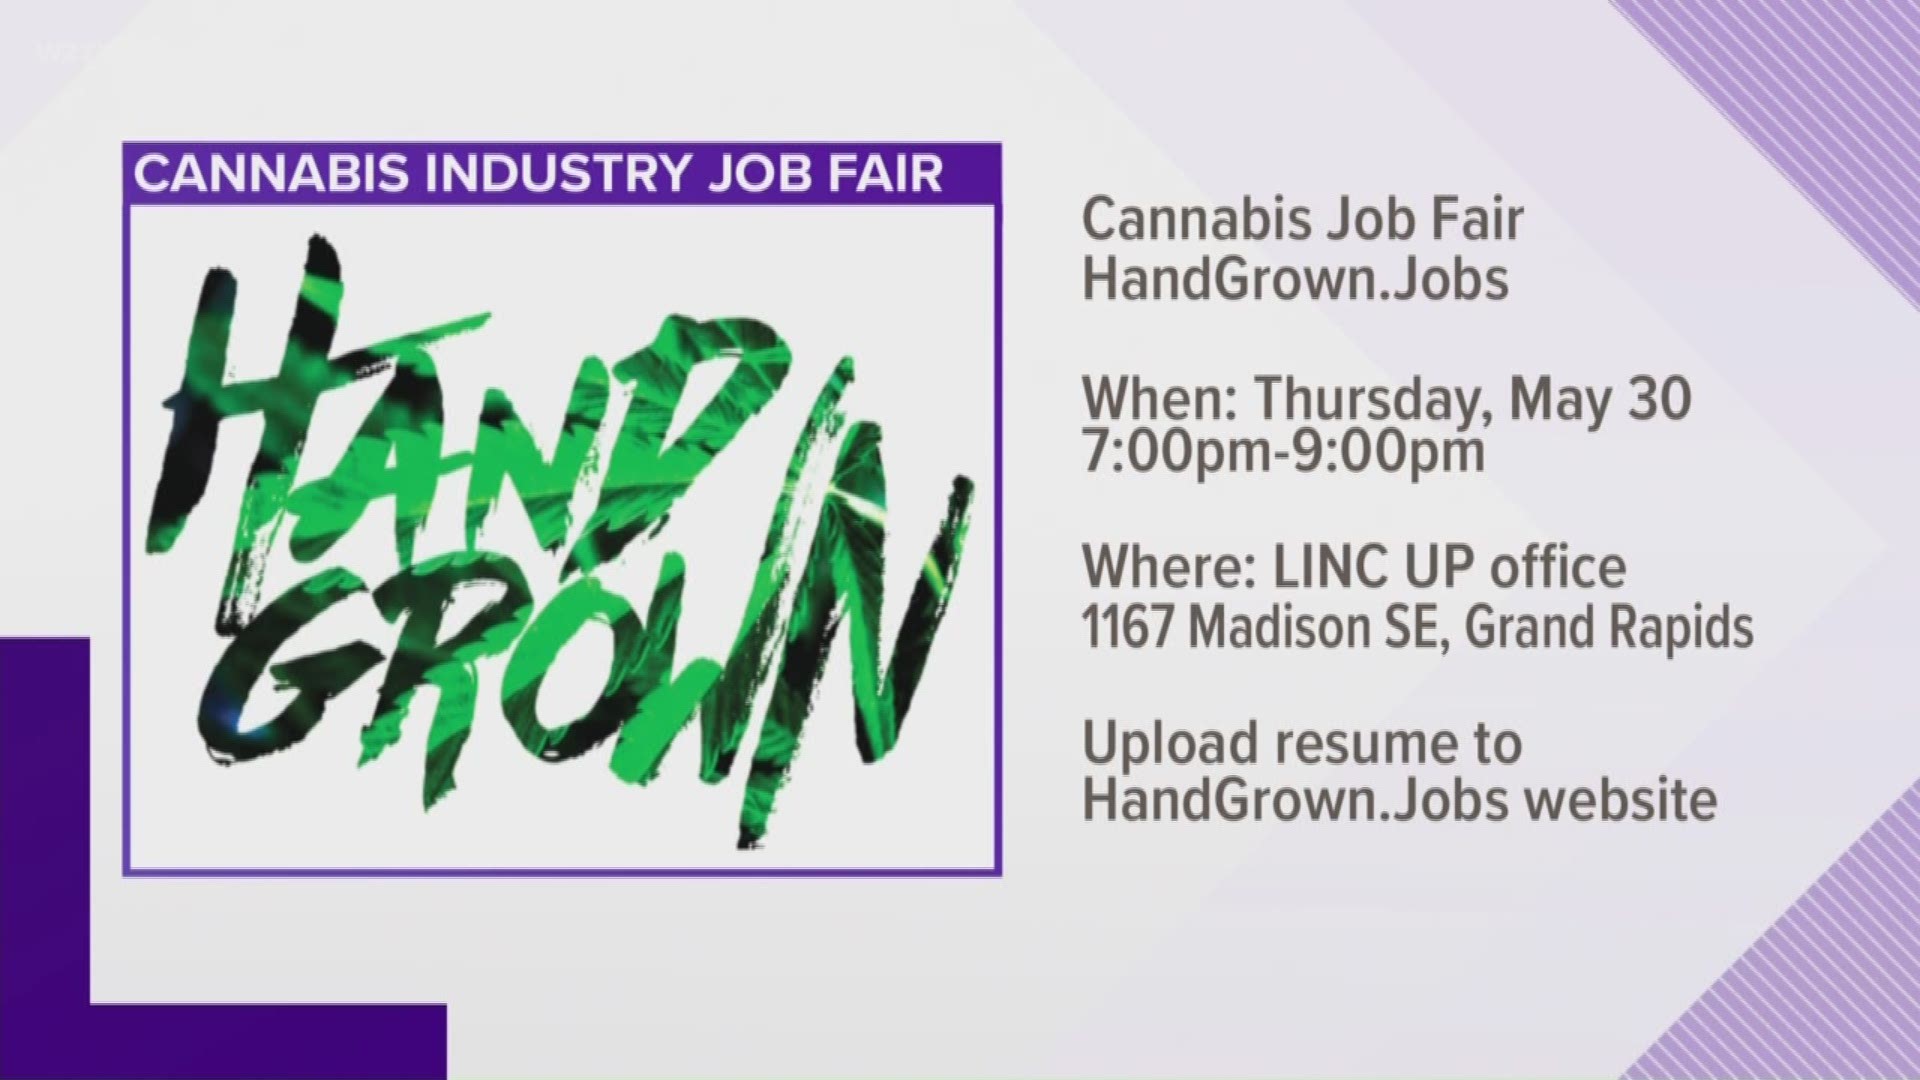 Organizers say it's a chance to meet with employers from different sectors of the industry.